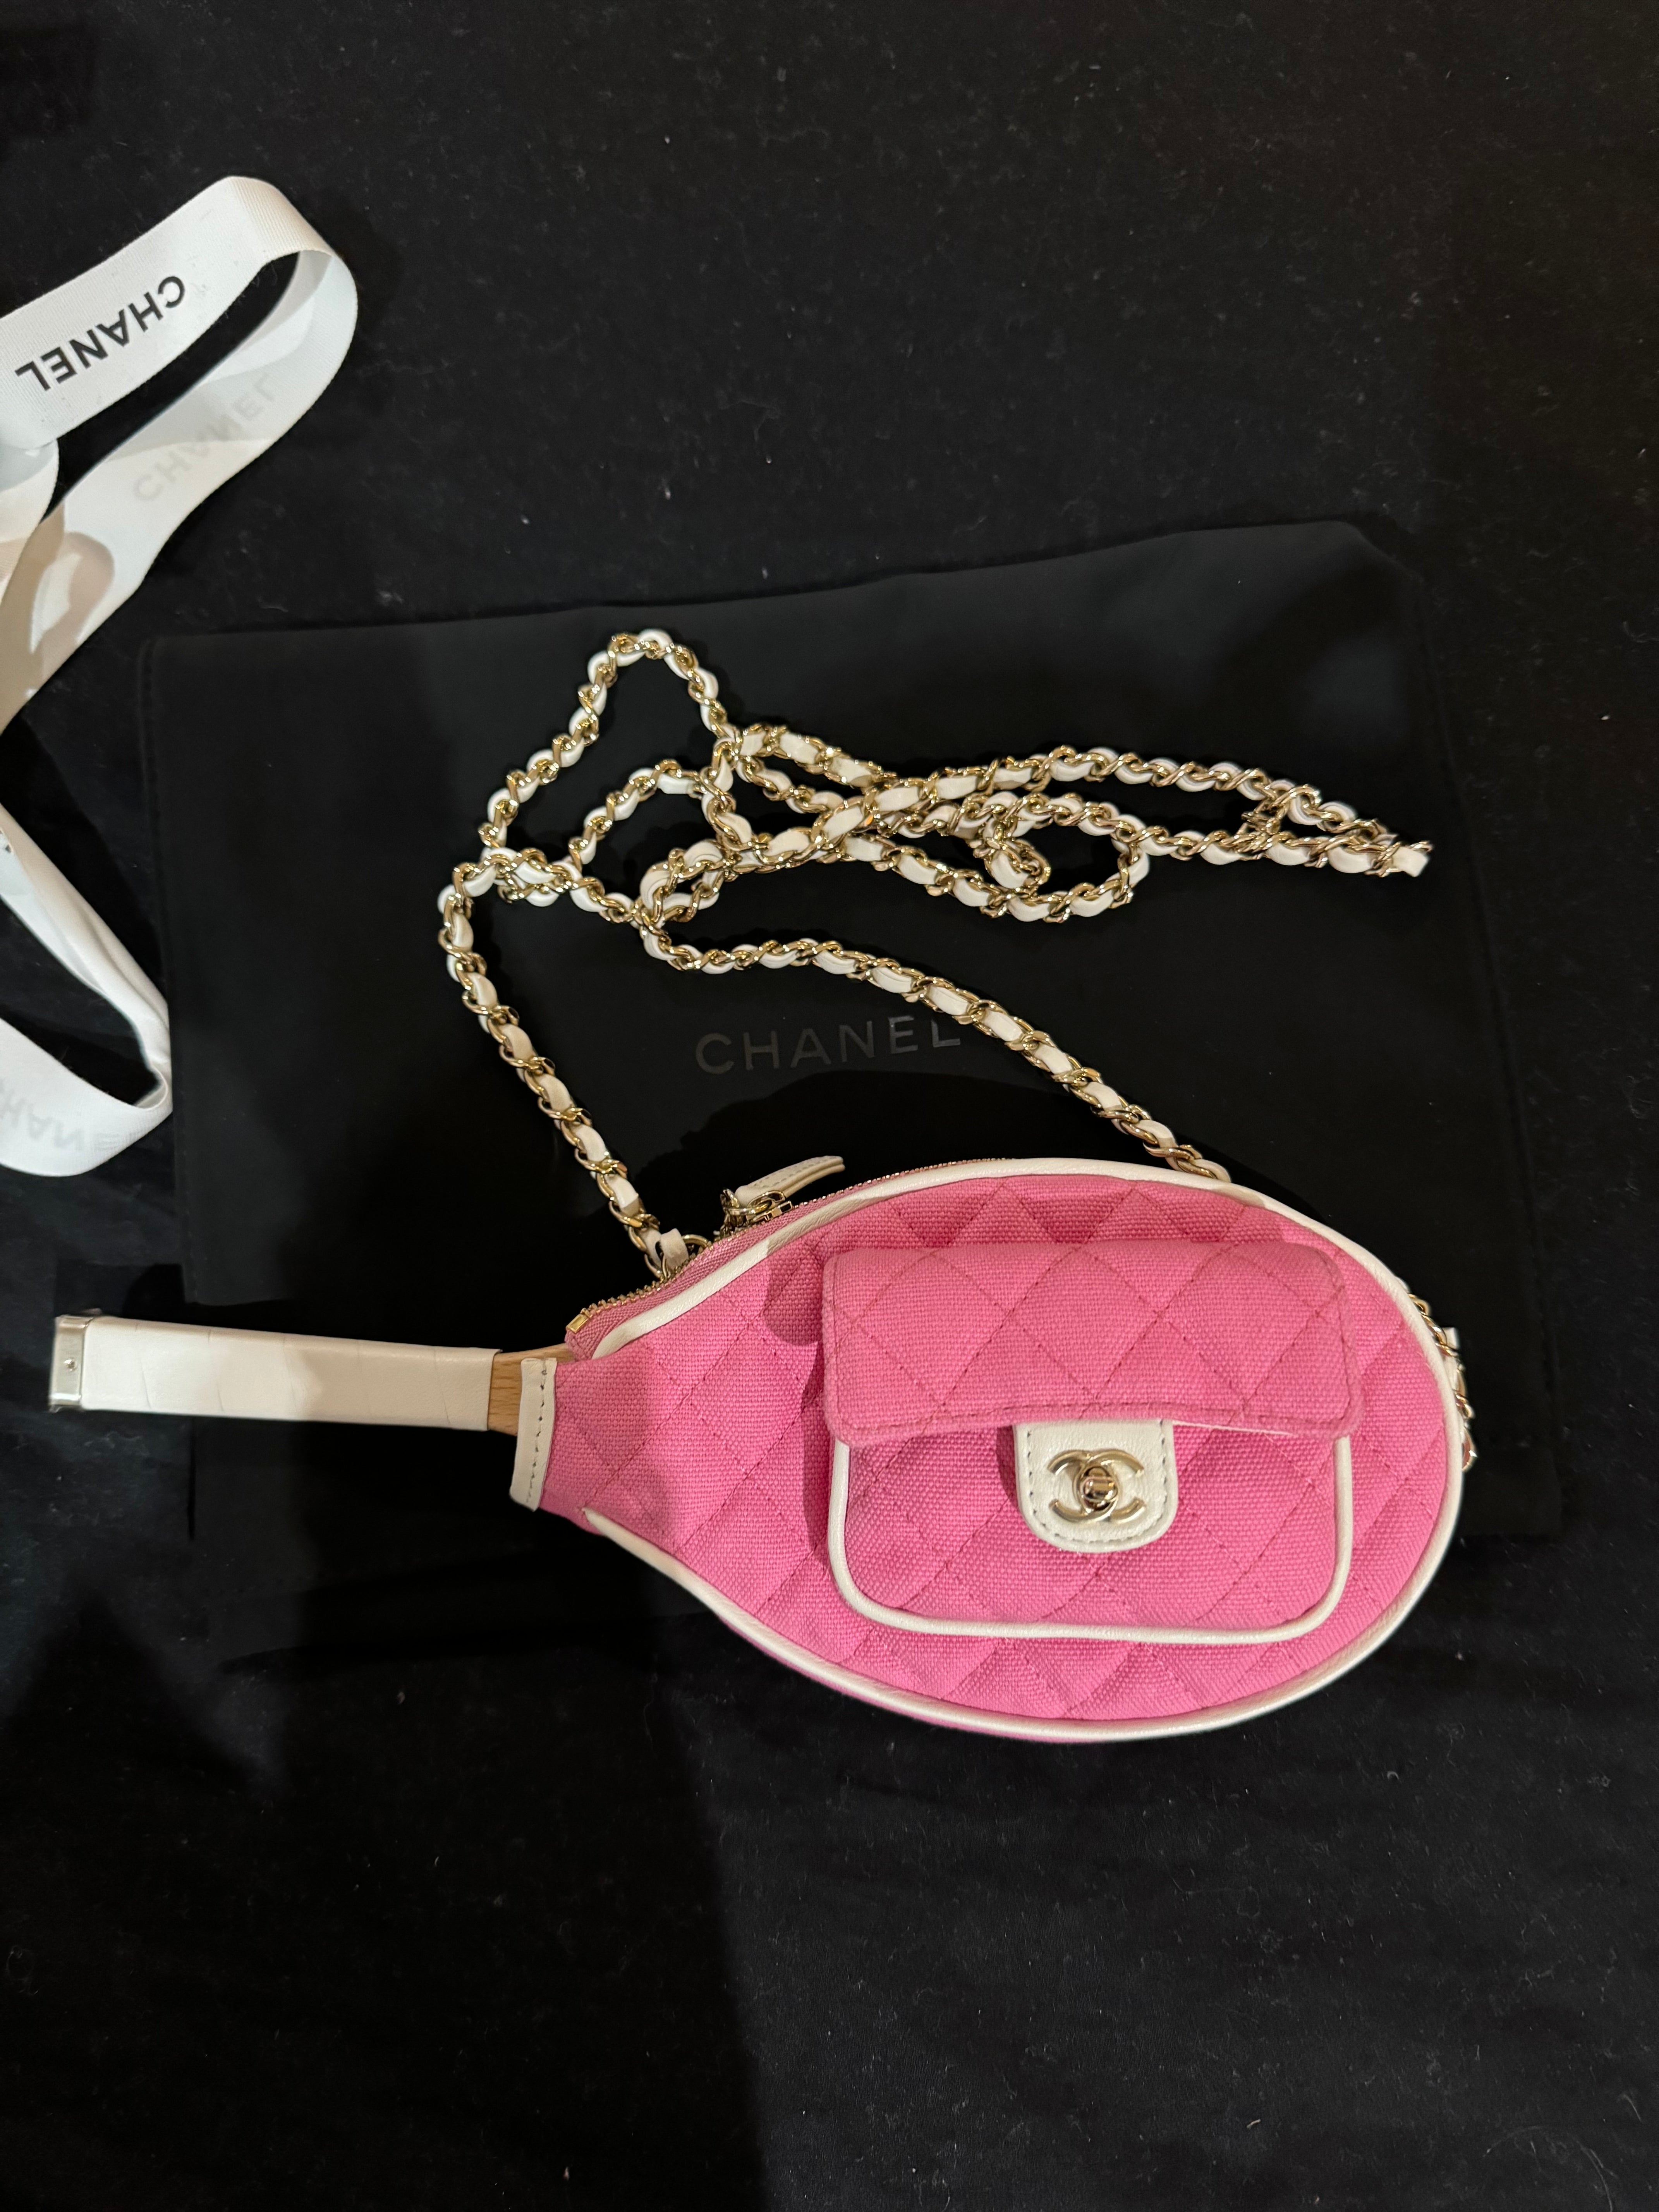 Chanel Tennis handbag in Barbie Pink and White Mirror Bag